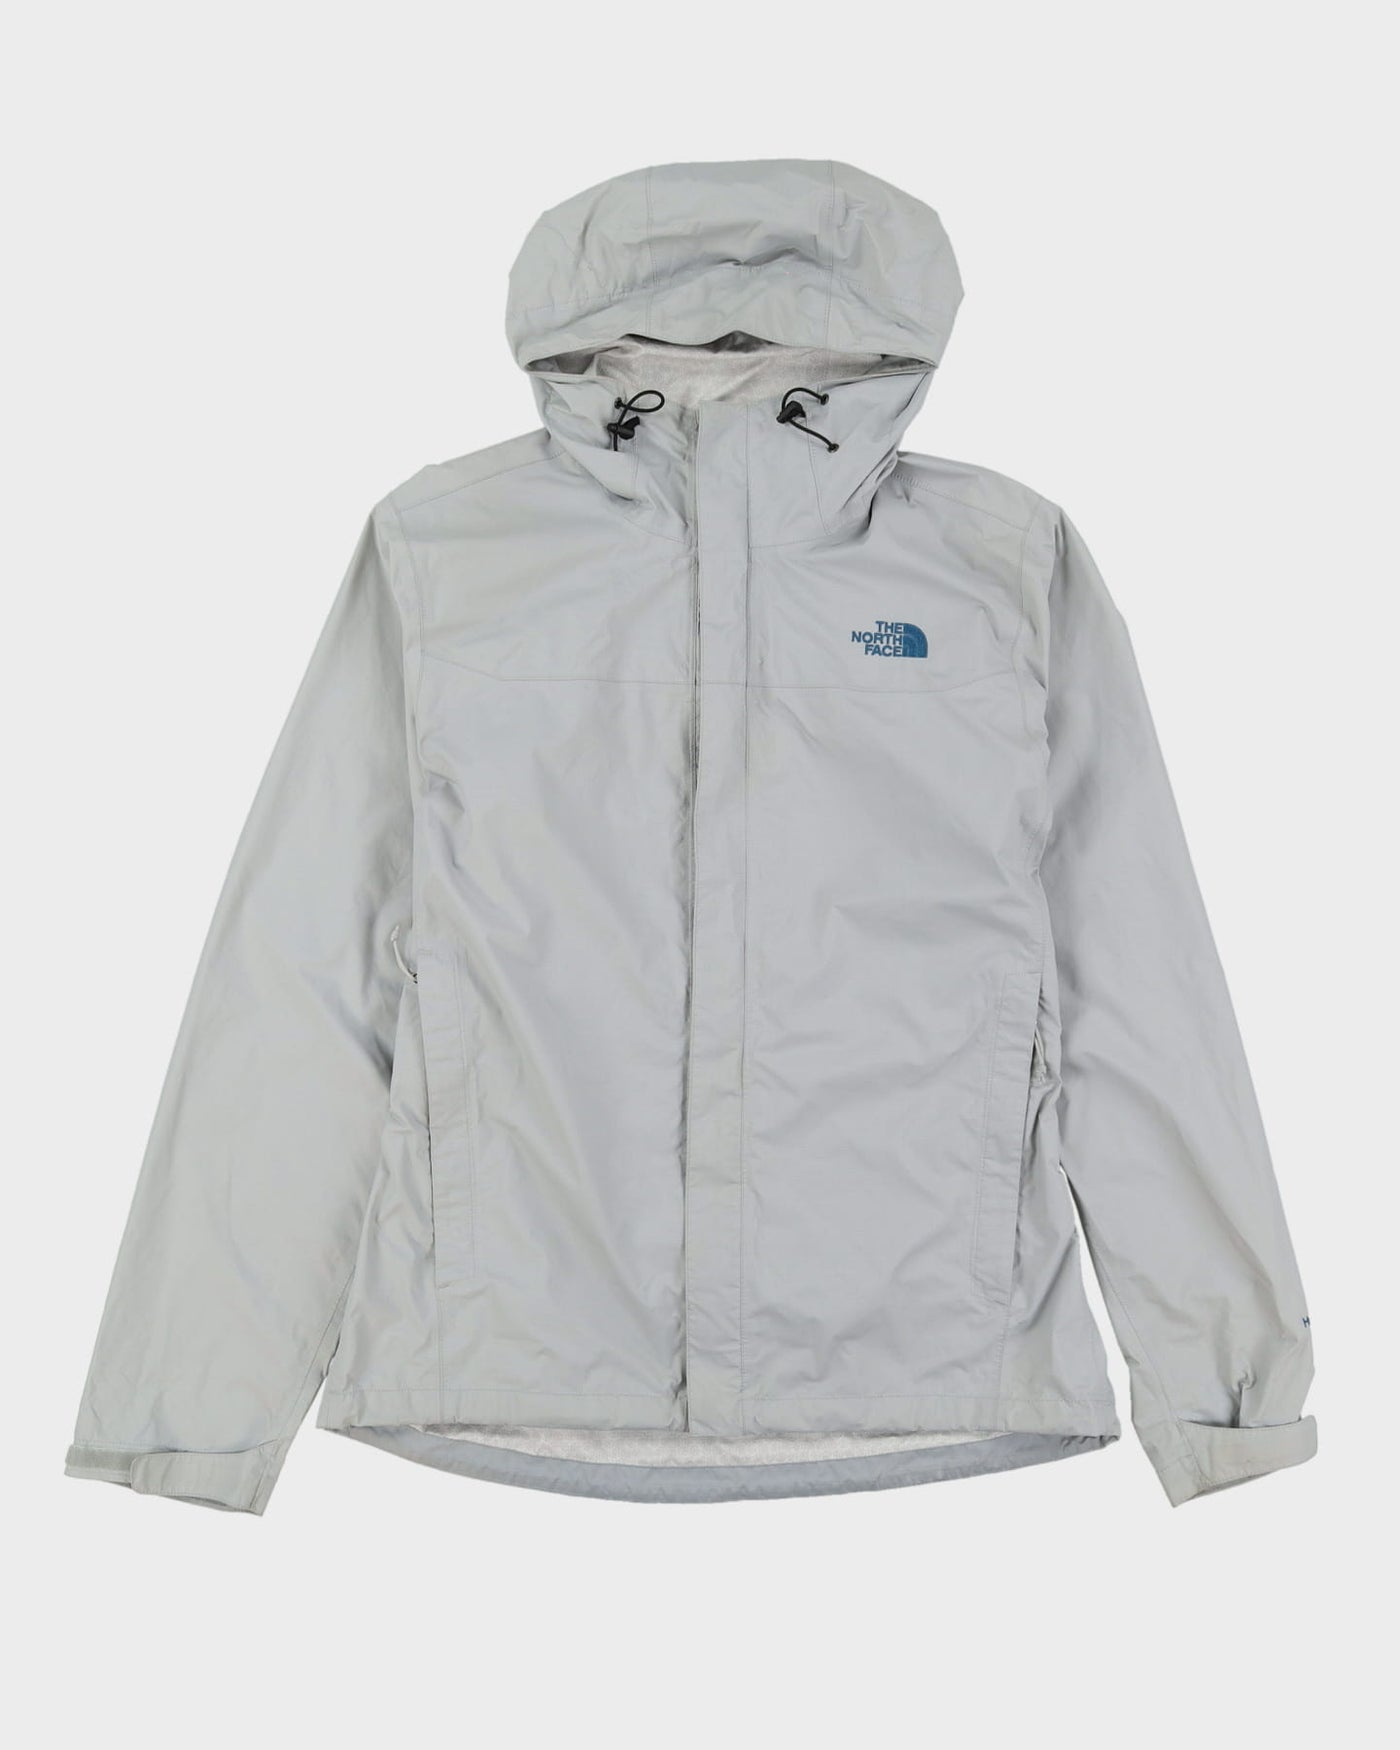 The North Face Grey Full Zip Anorak Jacket - M